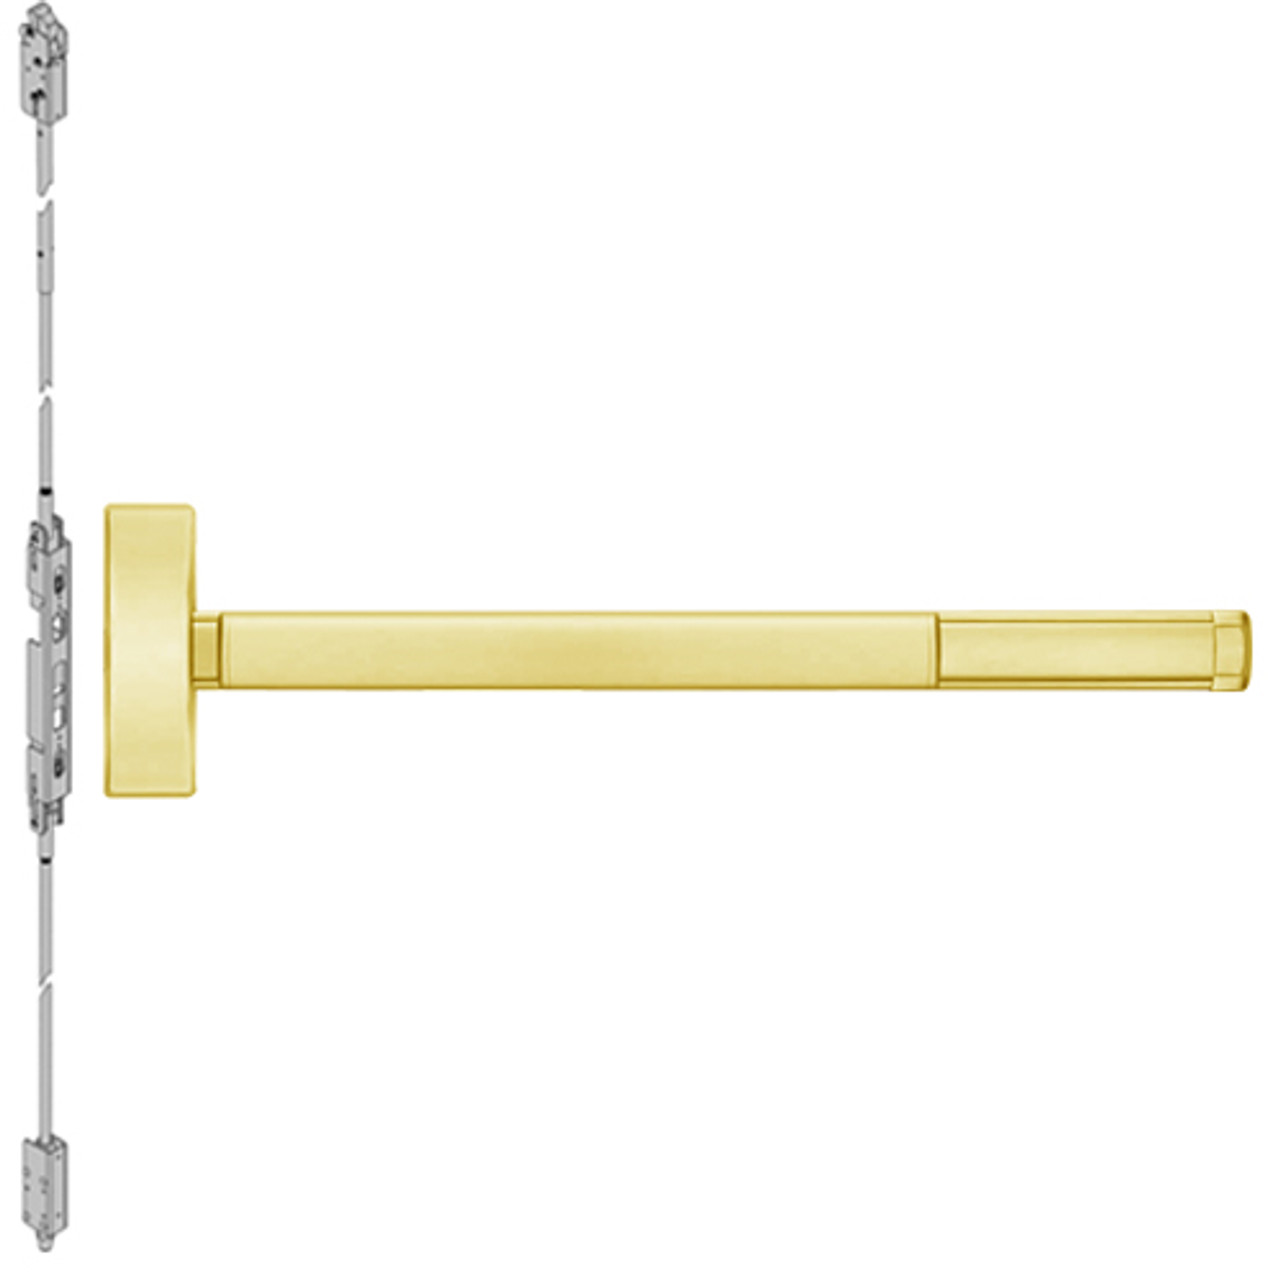 MLR2814-605-48 PHI 2800 Series Concealed Vertical Rod Exit Device with Motorized Latch Retraction Prepped for Lever-Knob Always Active in Bright Brass Finish